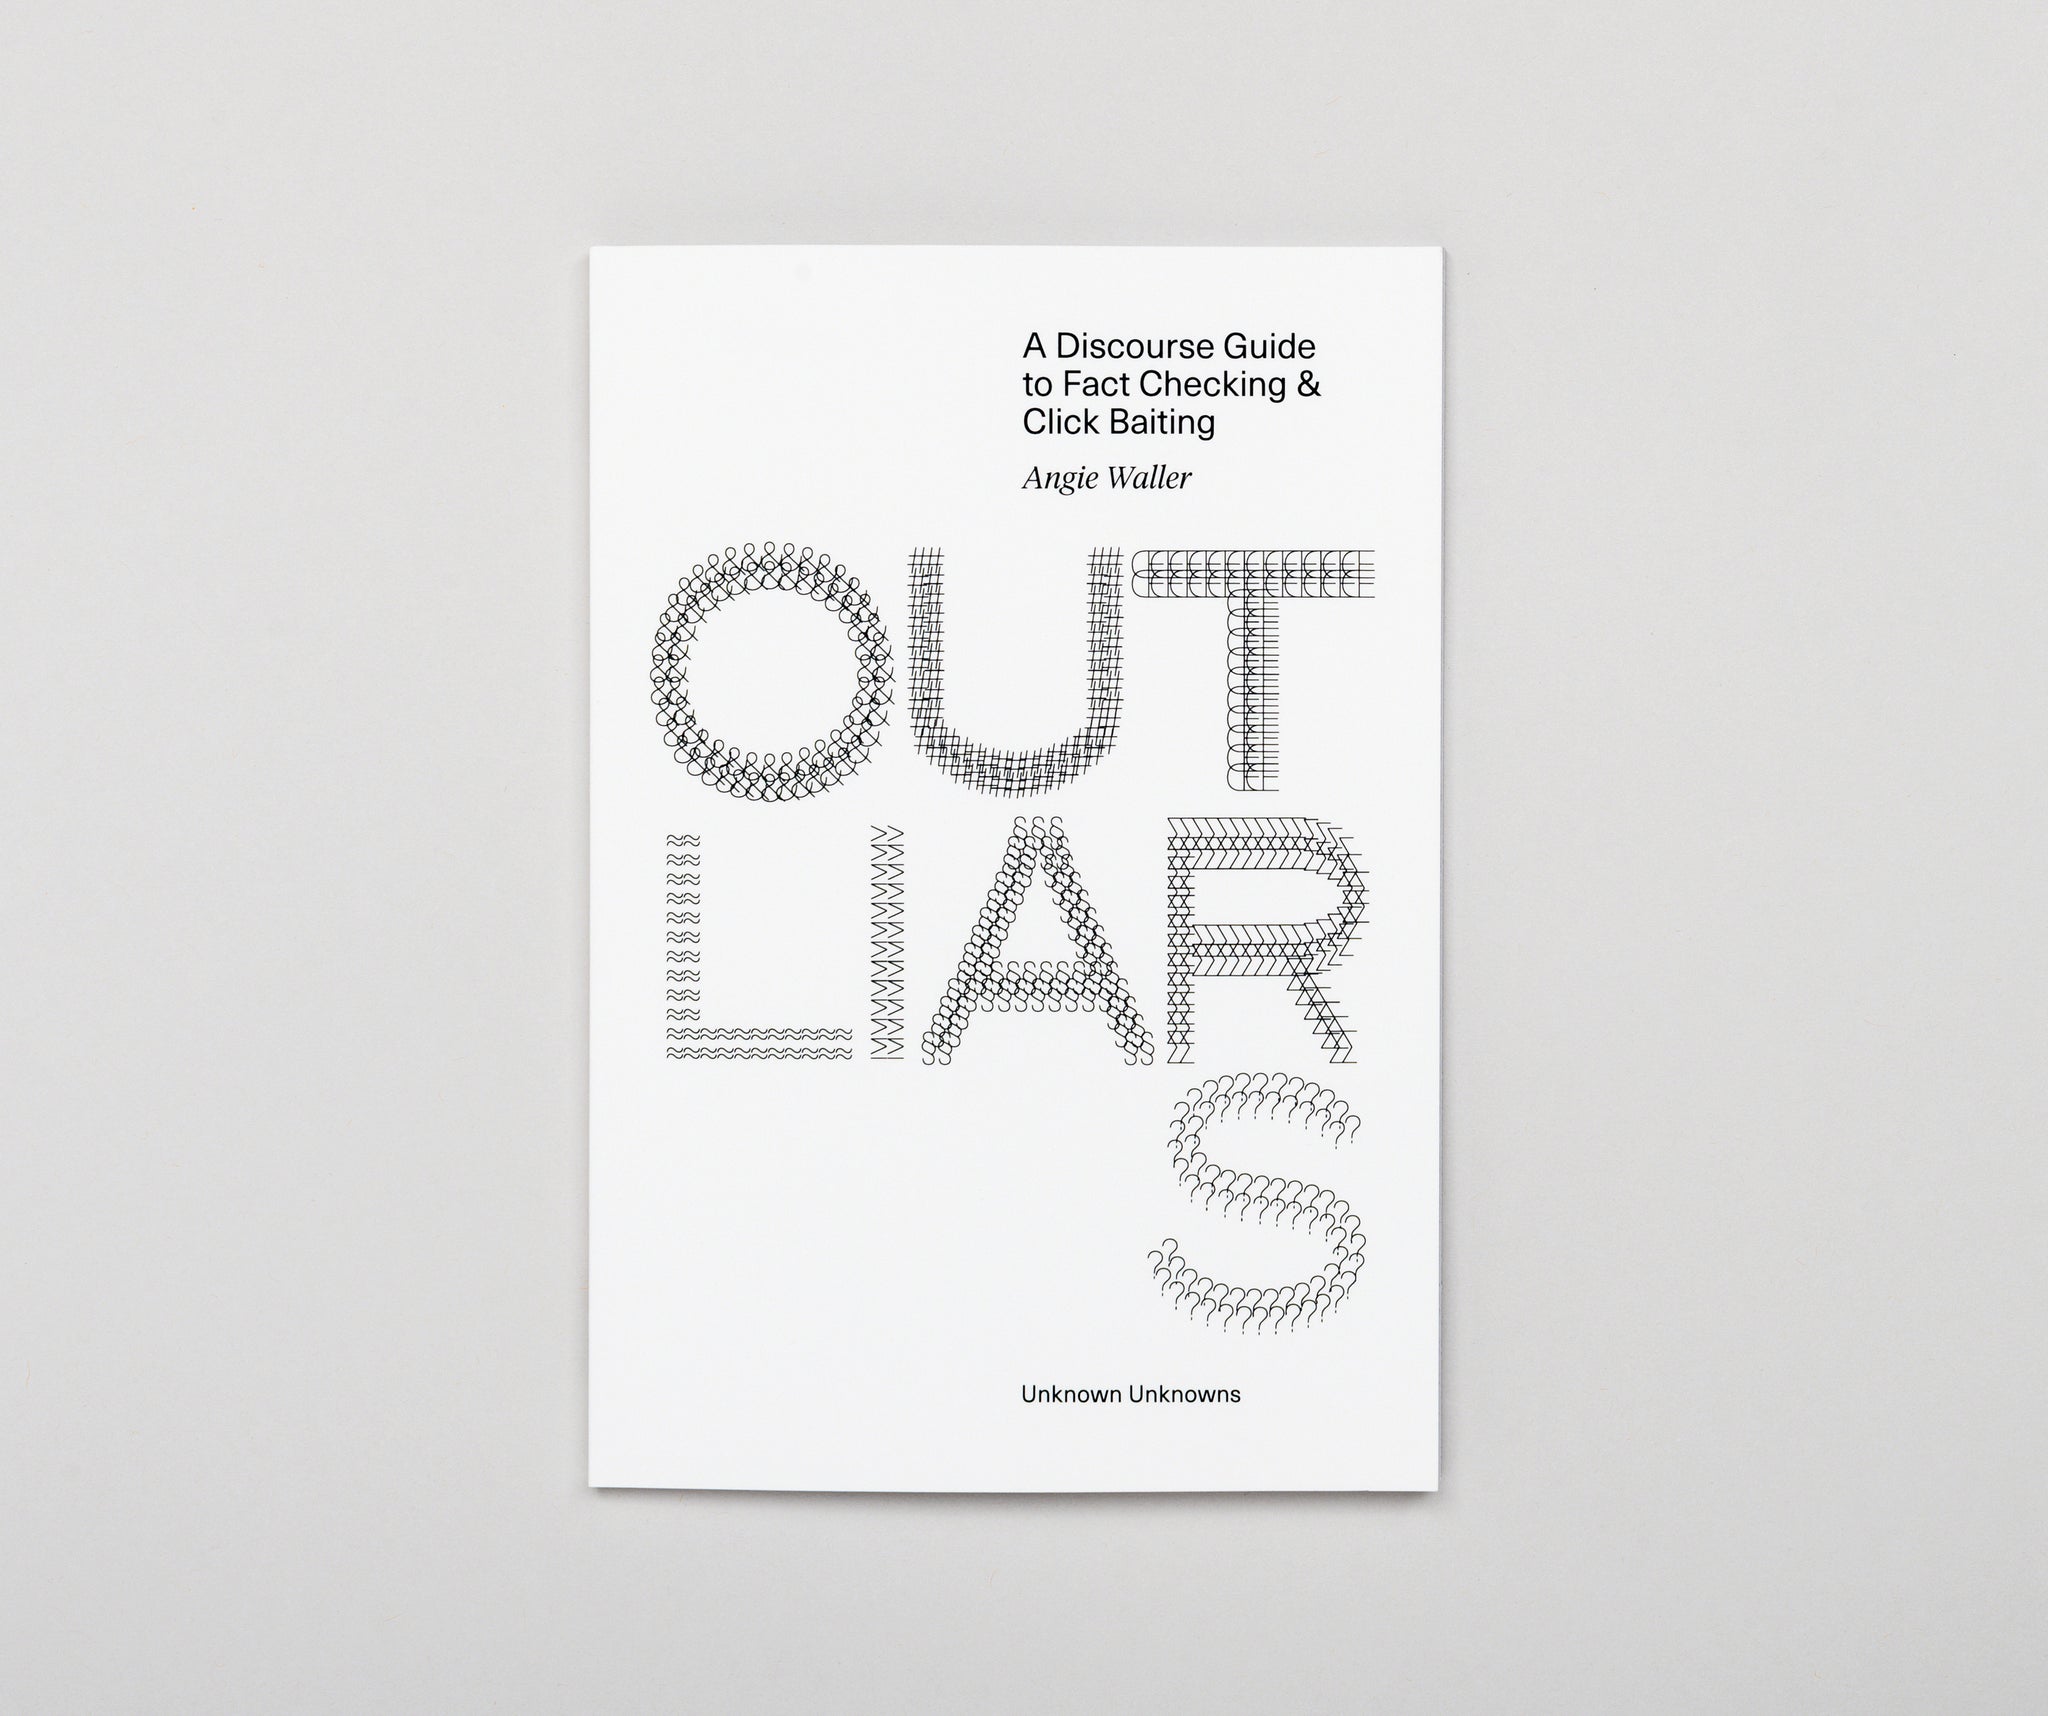 Angie Waller, "OUTLIARS"